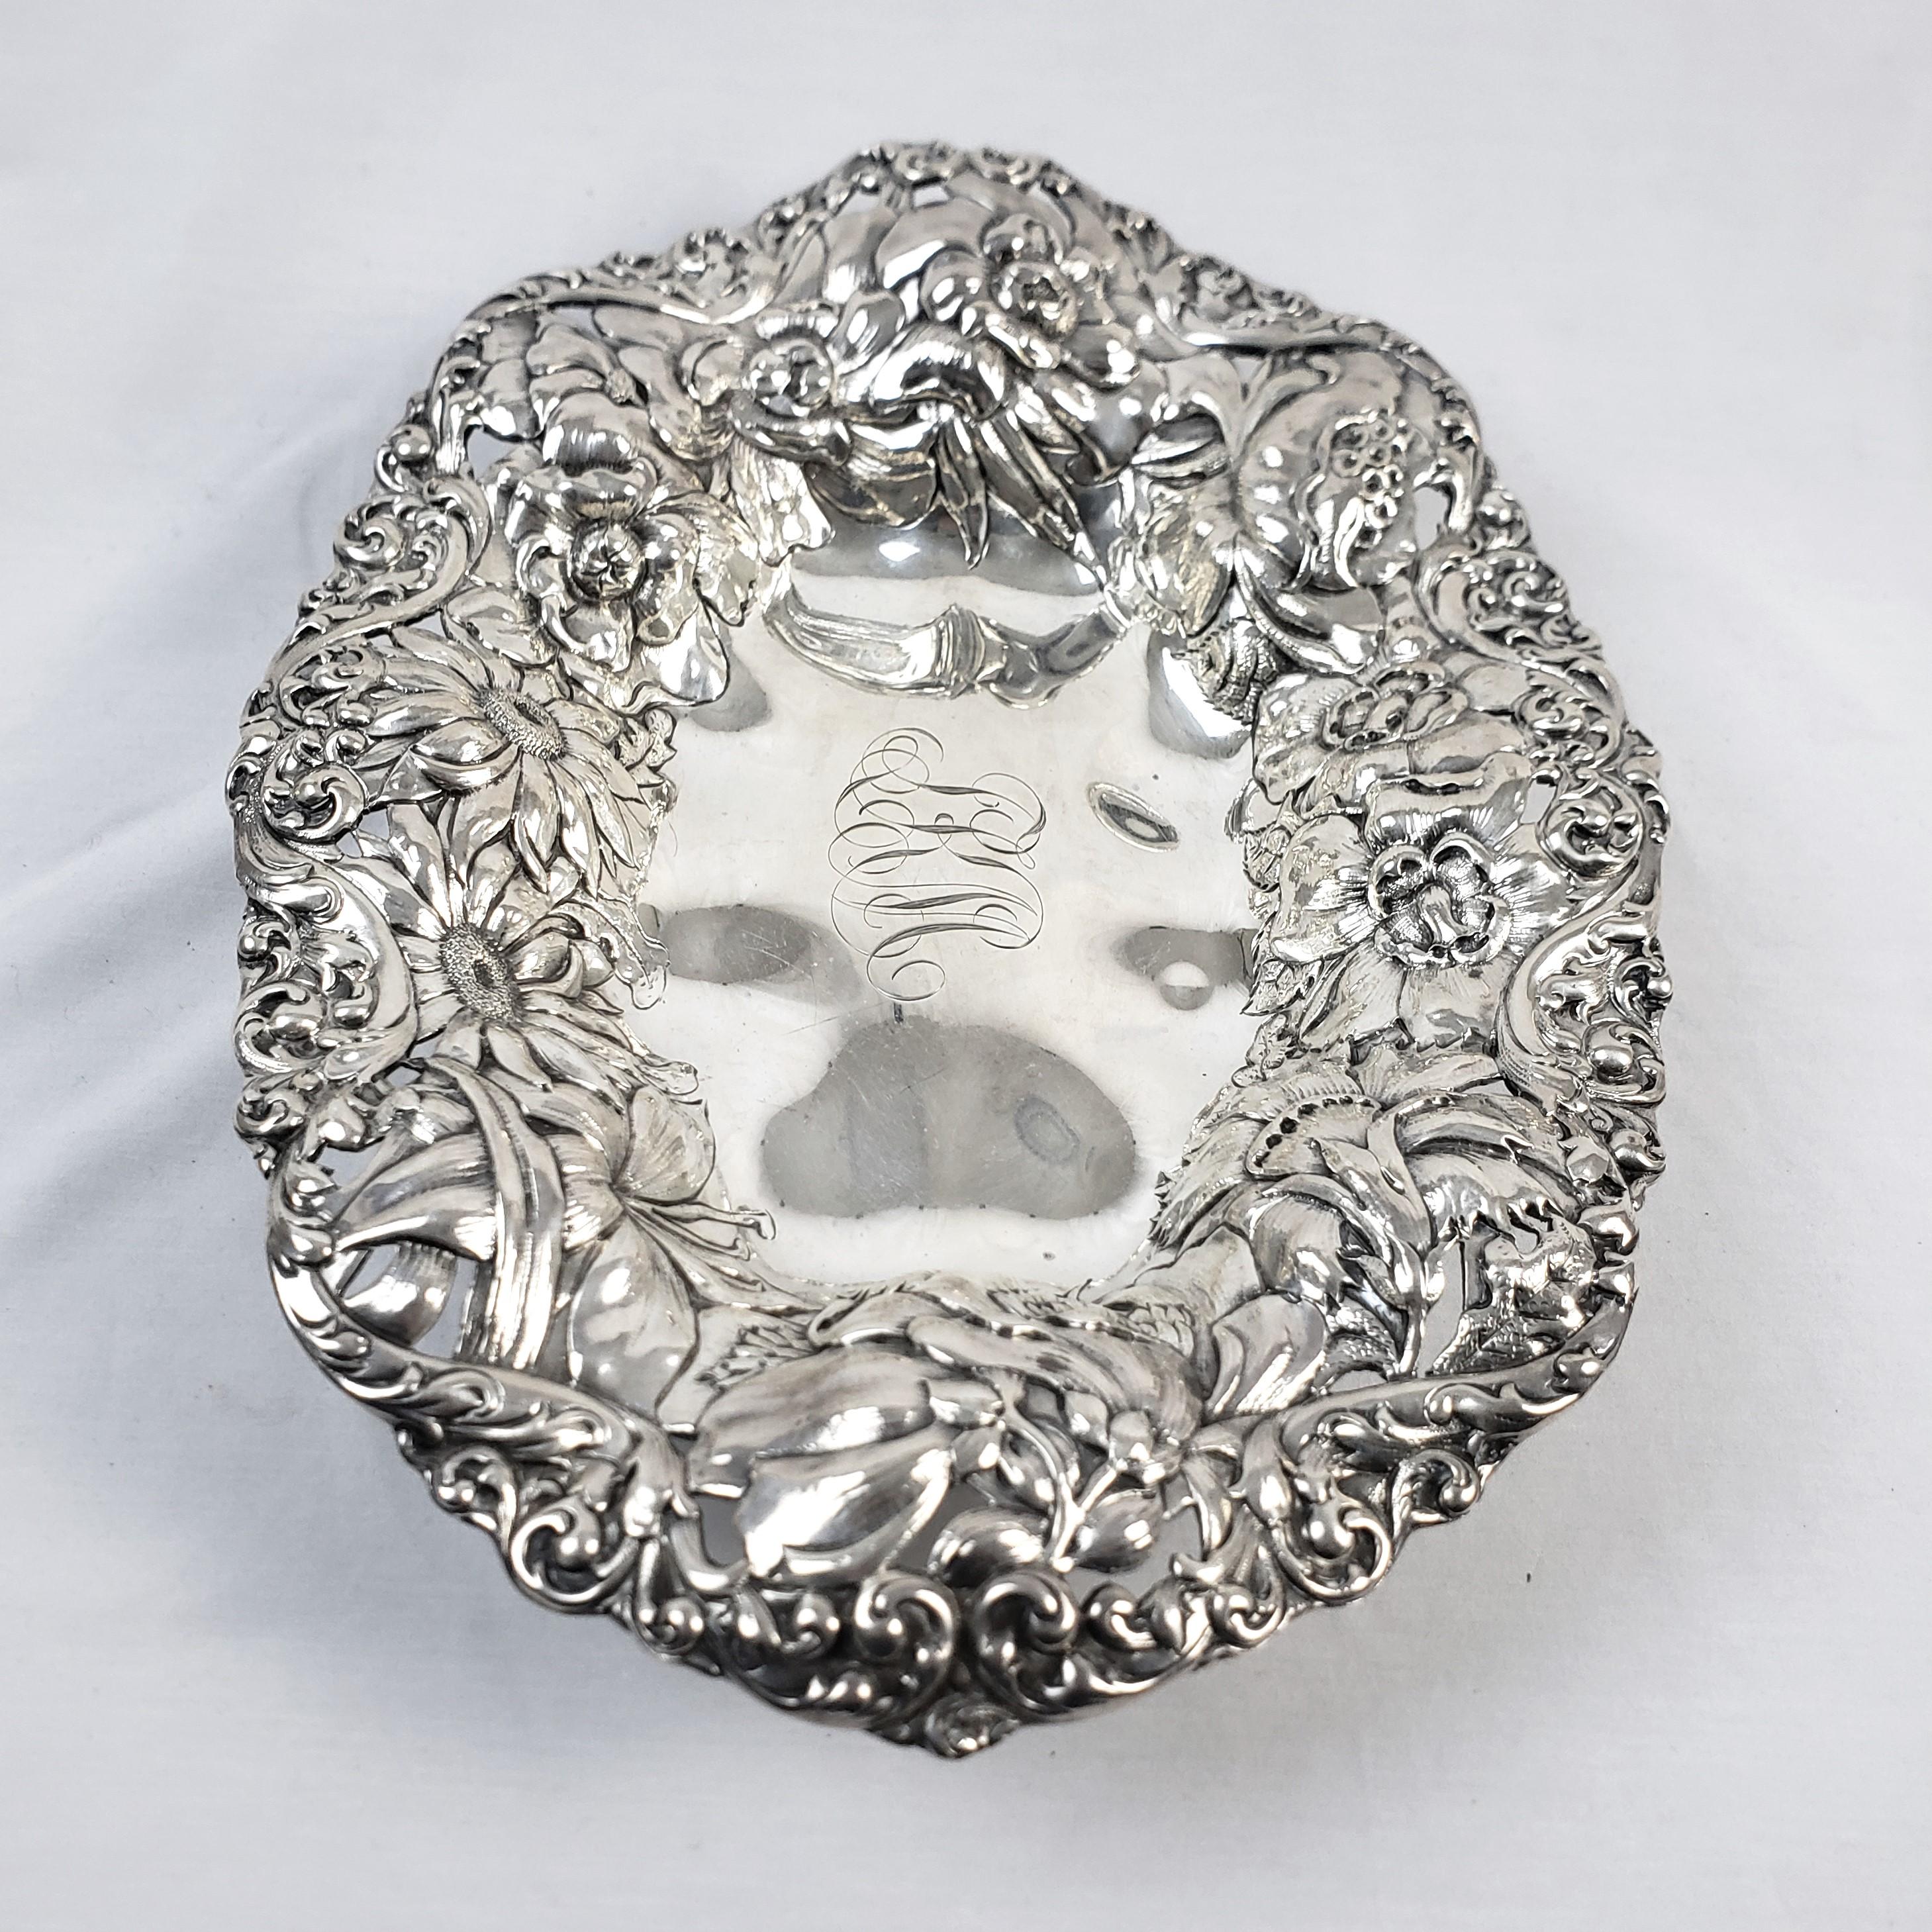 Antique Gorham Sterling Silver Bowl with Ornate Chased Floral Decoration In Good Condition For Sale In Hamilton, Ontario